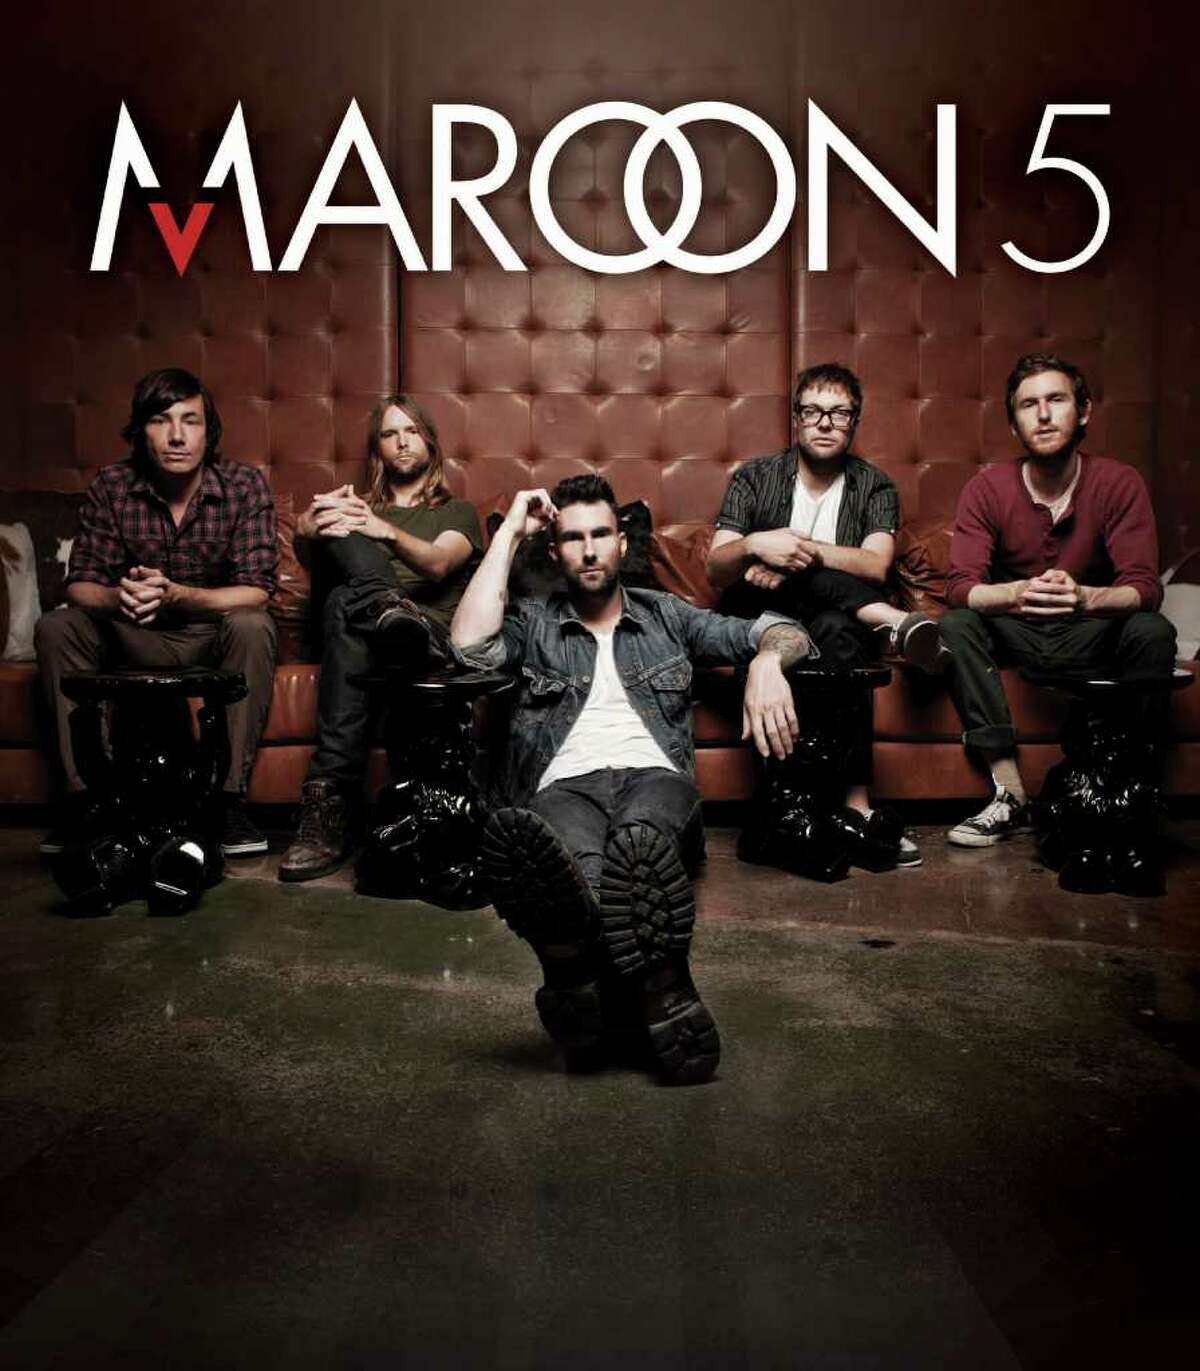 Maroon 5 will perform at Foxwoodís MGM Grand Theater on Sunday, Aug. 7, at 7 p.m.